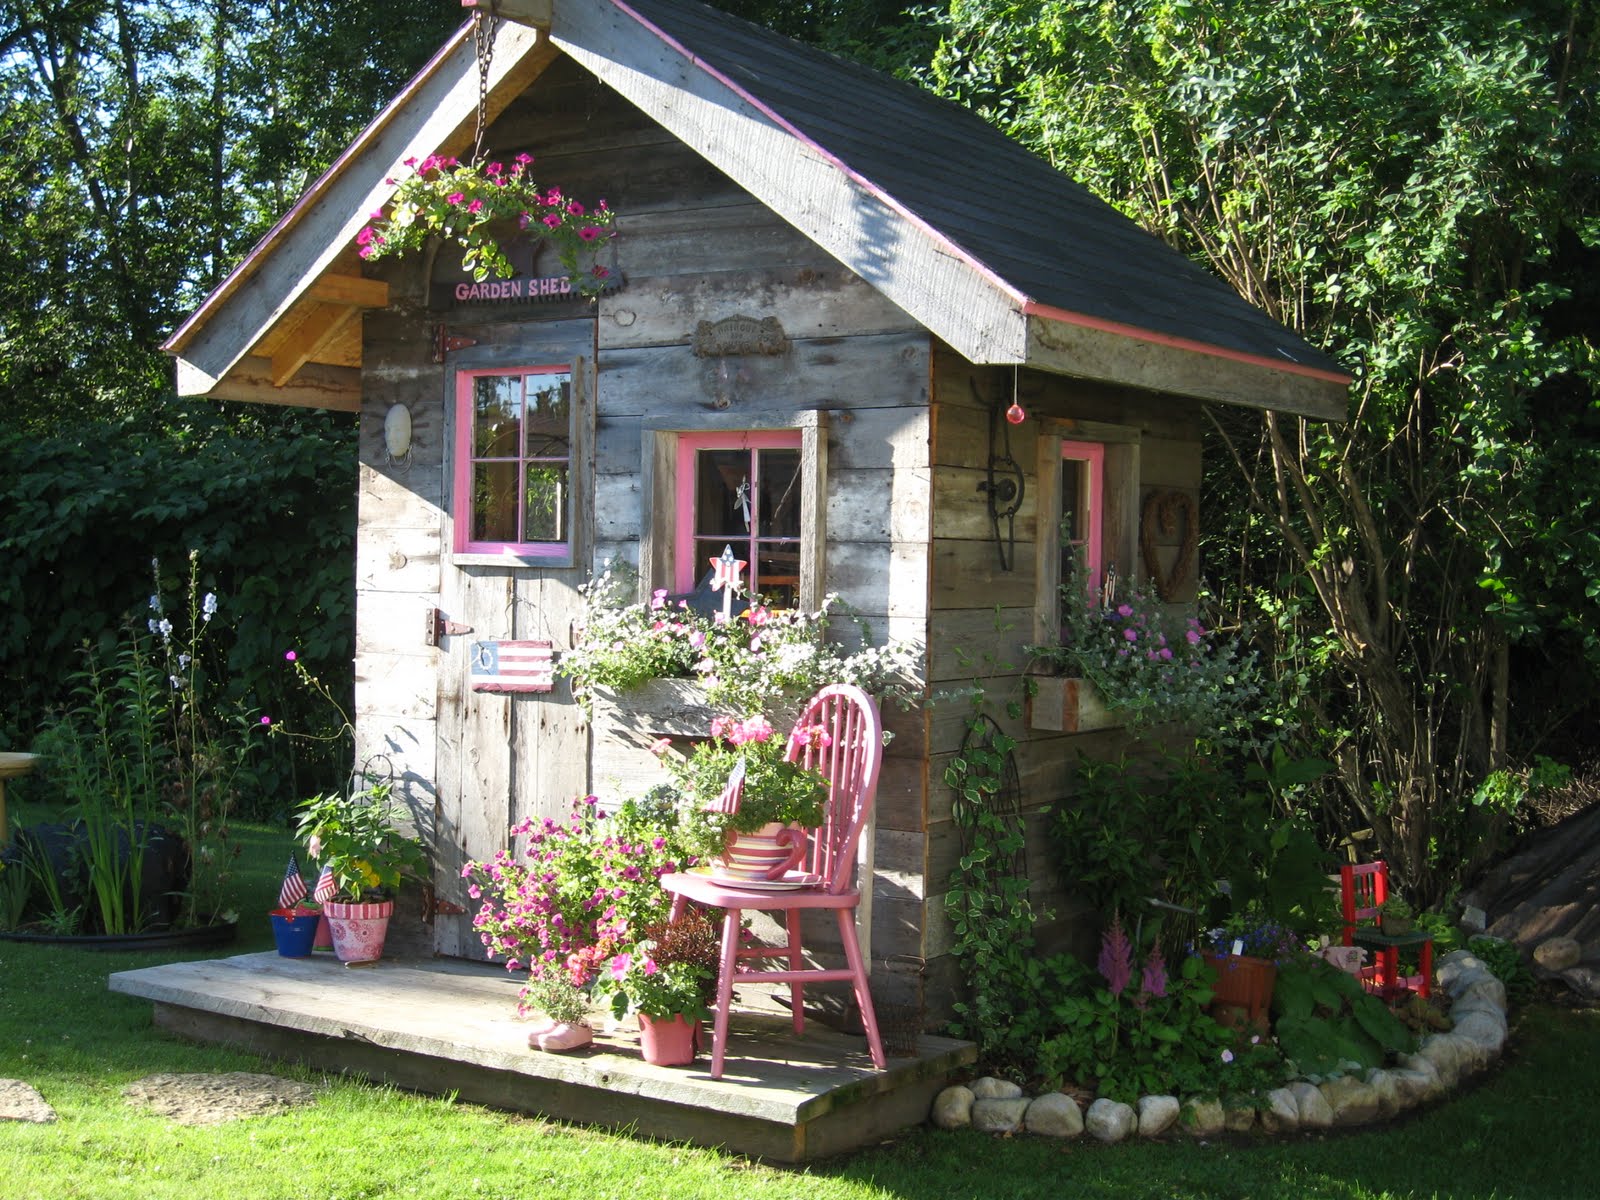 Cute-little-garden-shed-with-shabby-chic-exterior-